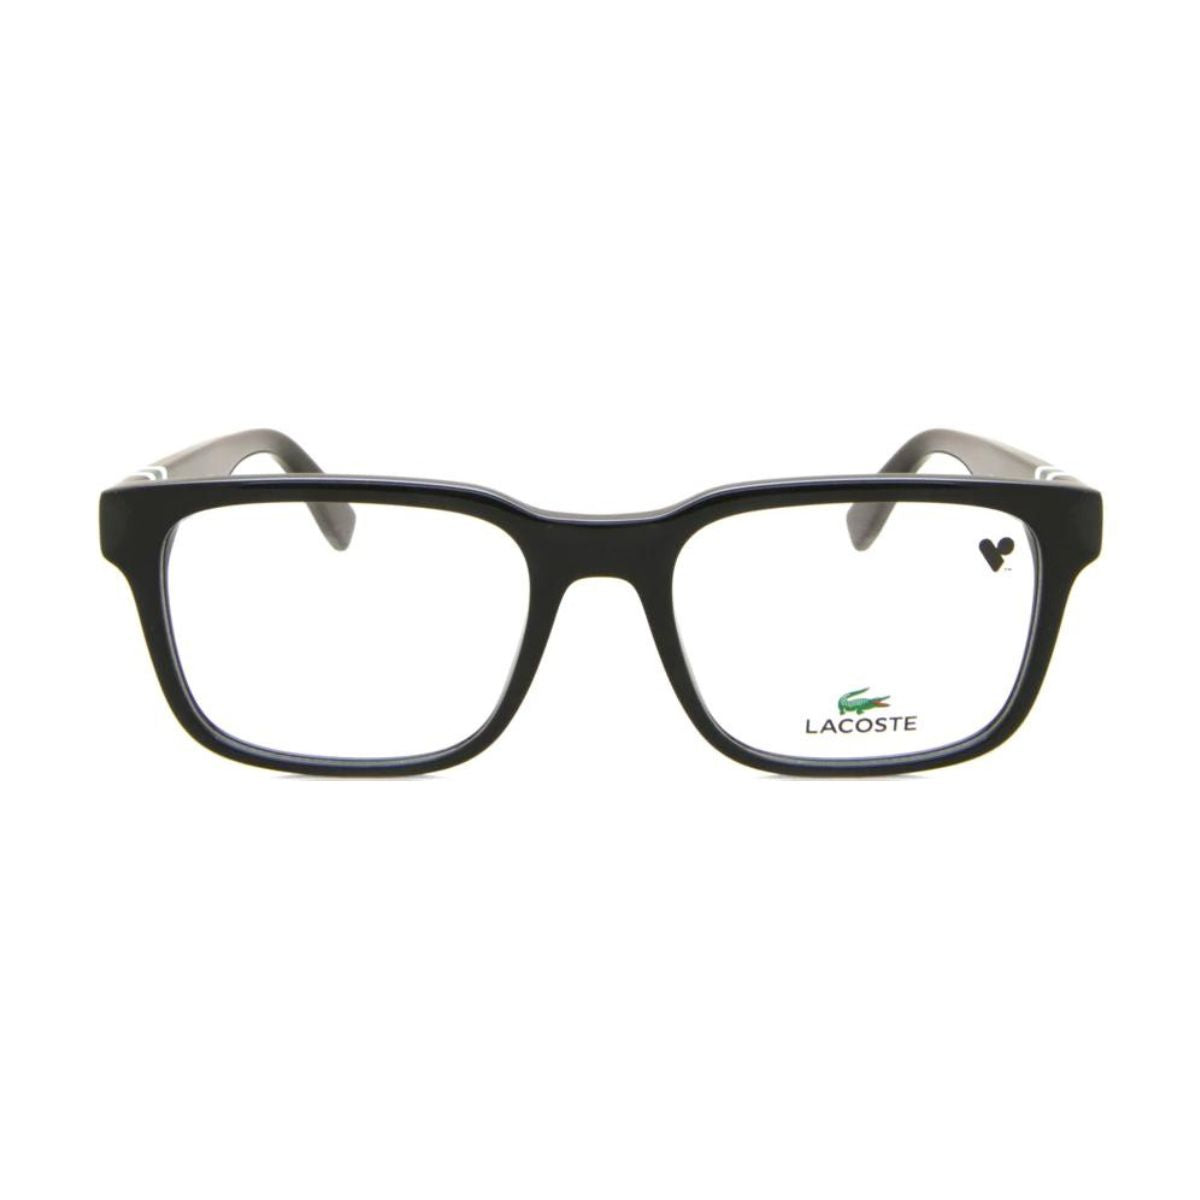 "Lacoste 2905 001 eye frame for men and women online at optorium"